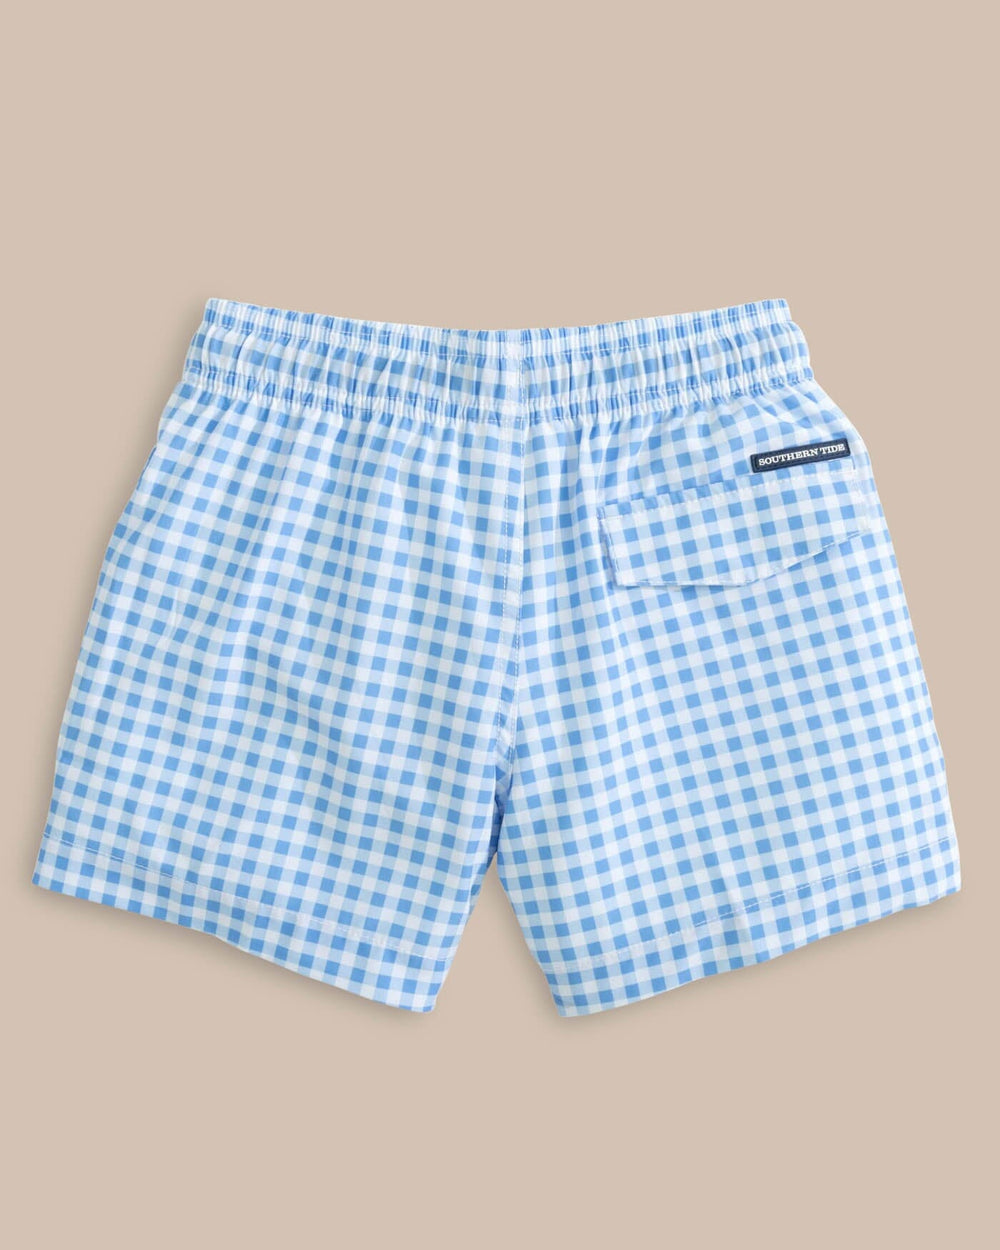 The back view of the Southern Tide Boys Baldwin Gingham Printed Swim Trunk by Southern Tide - Ocean Channel